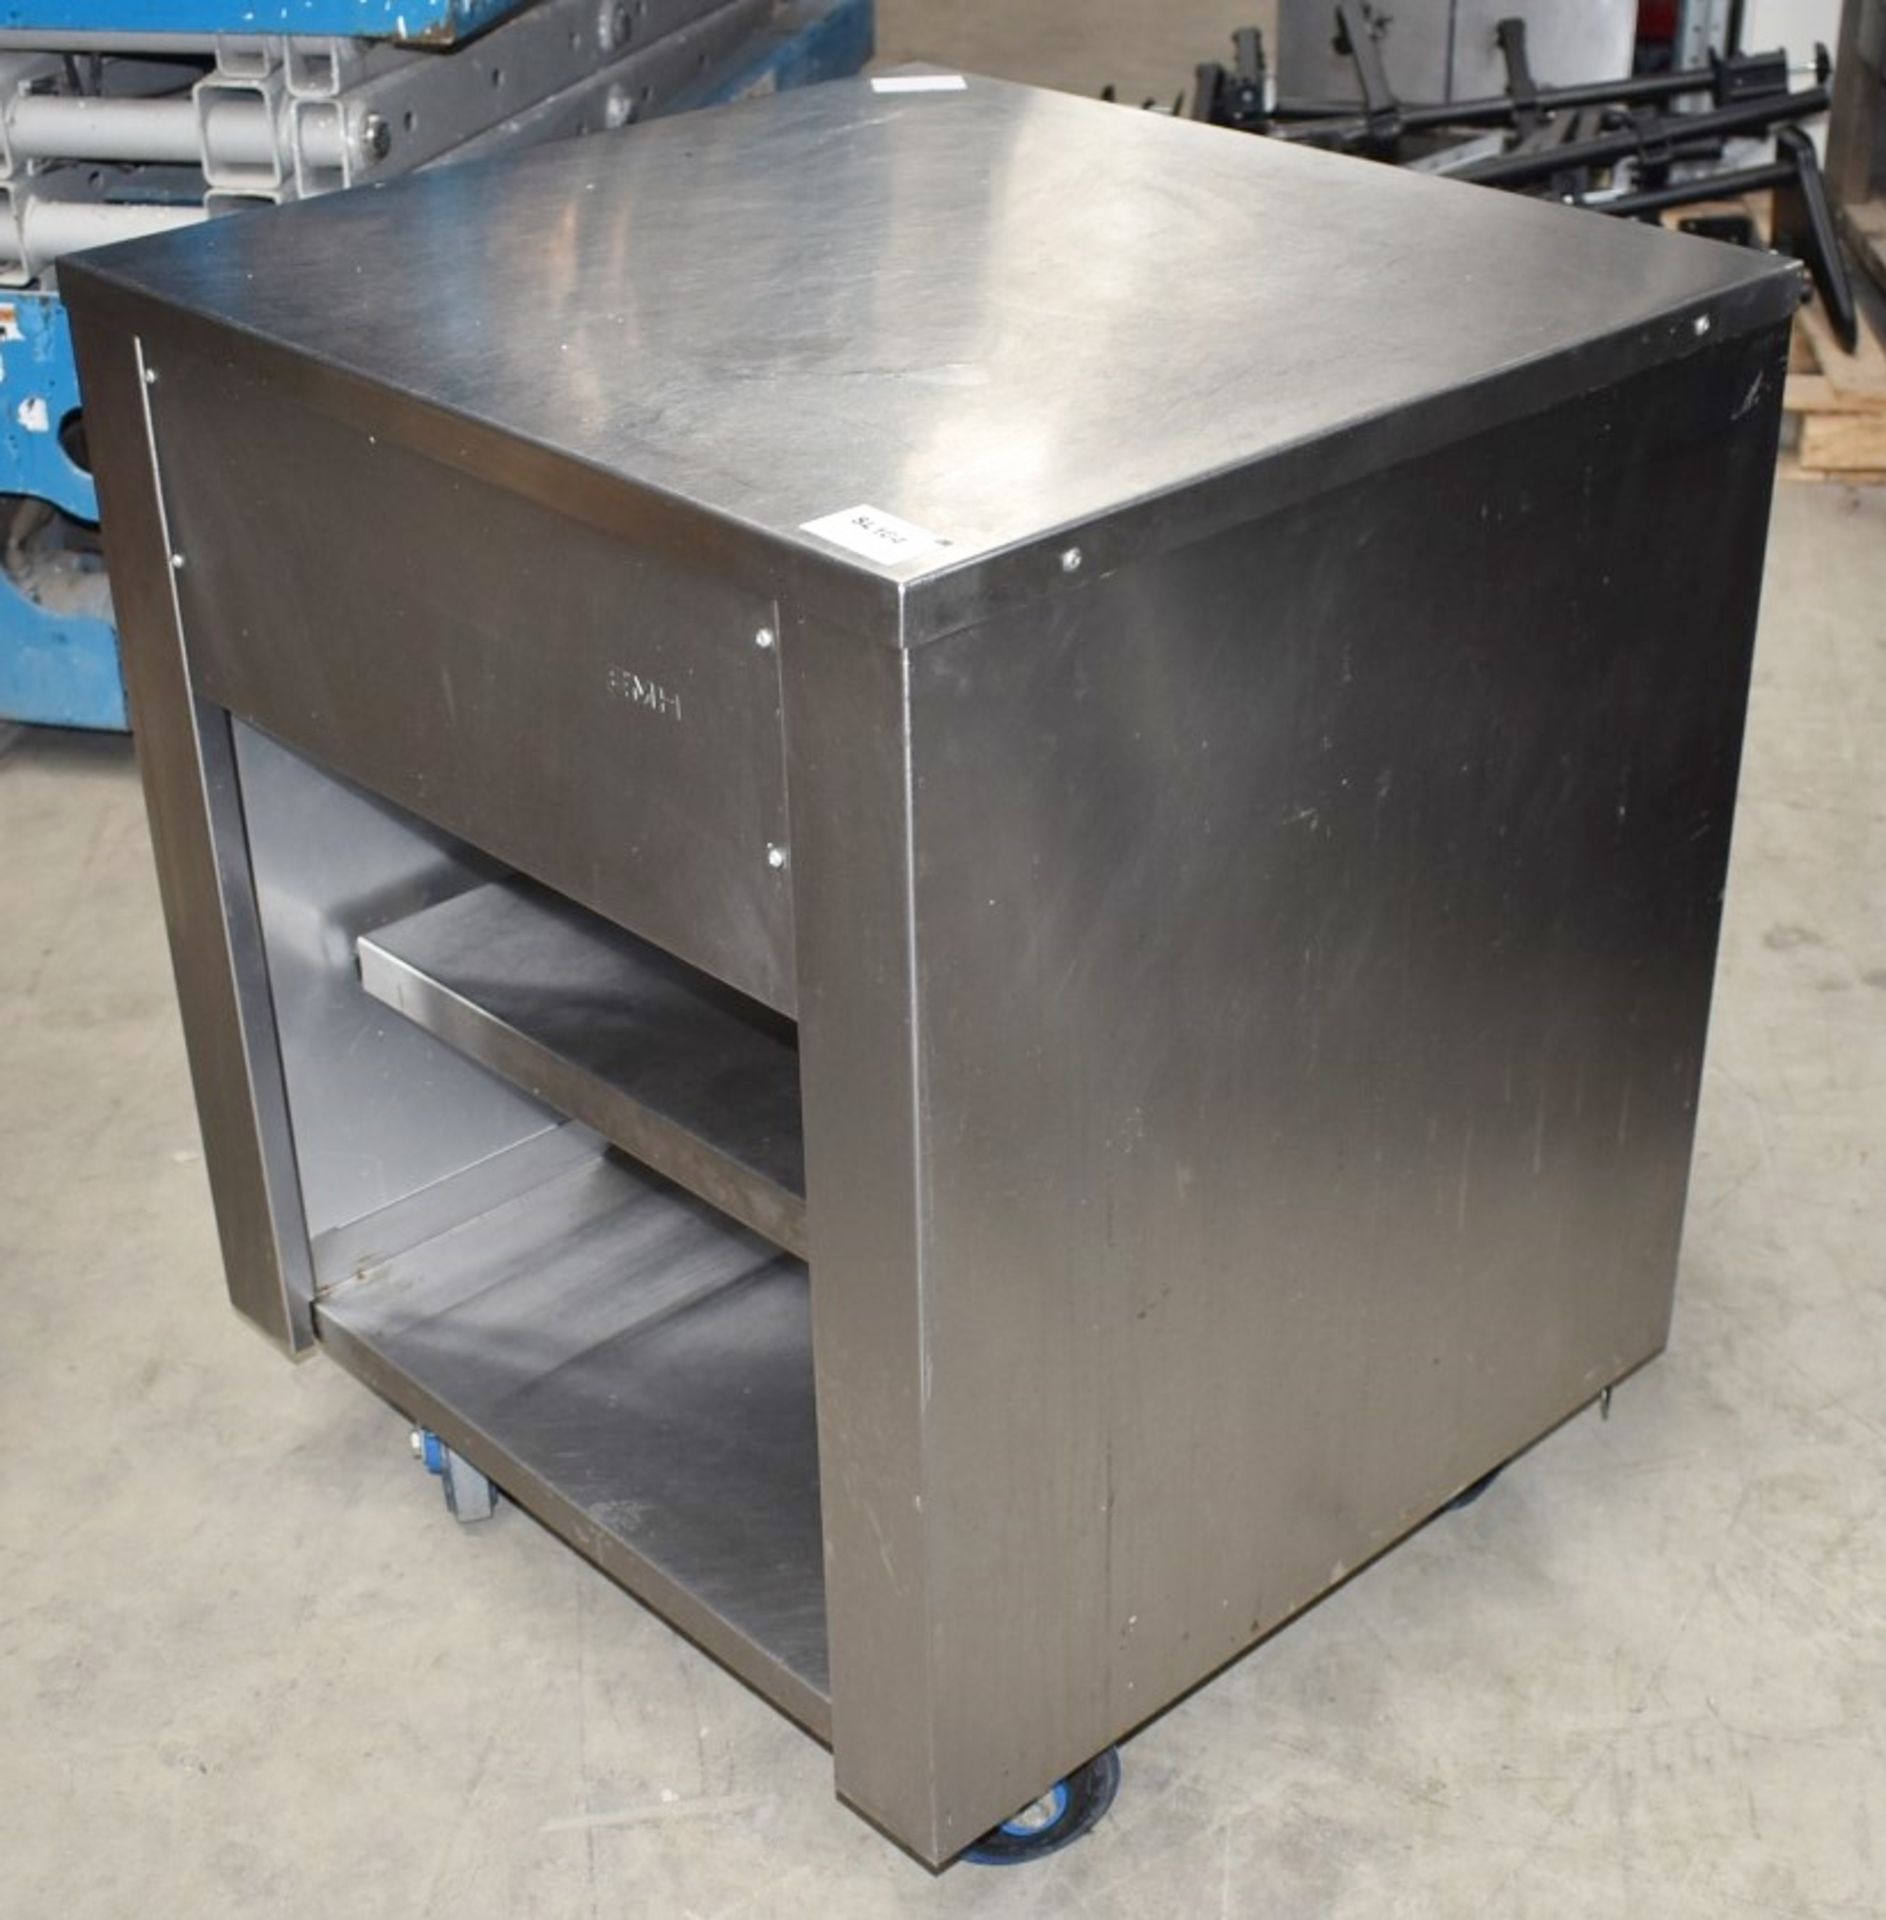 1 x Stainless Steel EMH Mobile Kitchen Unit Featuring Undershelves and Castor Wheels - Dimensions: - Image 2 of 7